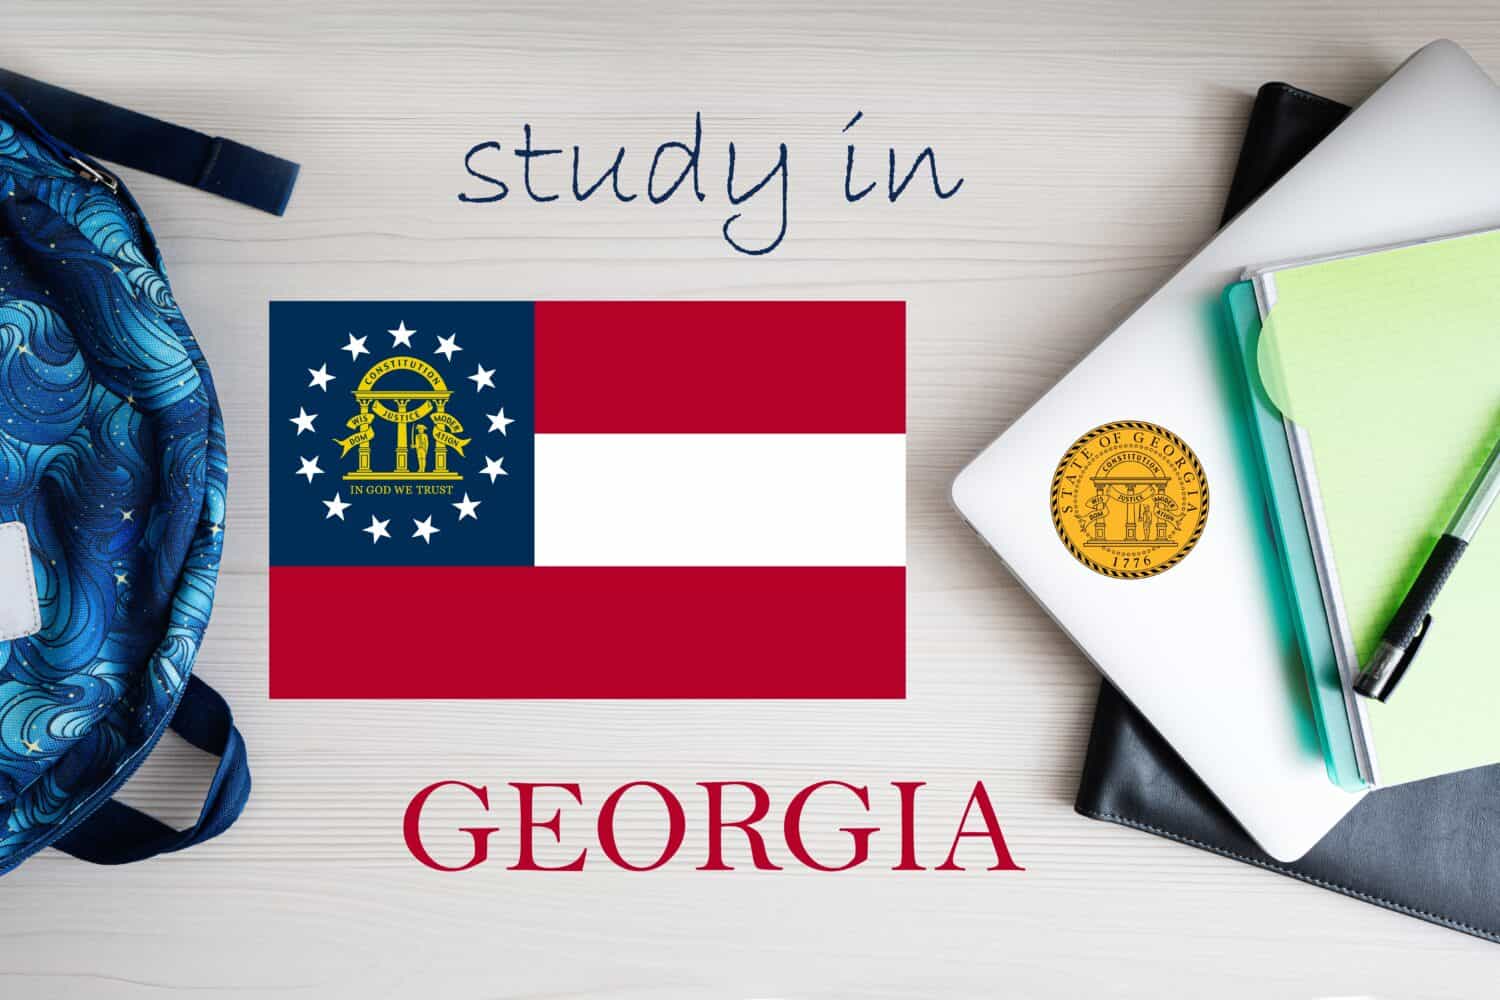 Study in Georgia. USA state. US education concept. Learn America concept.